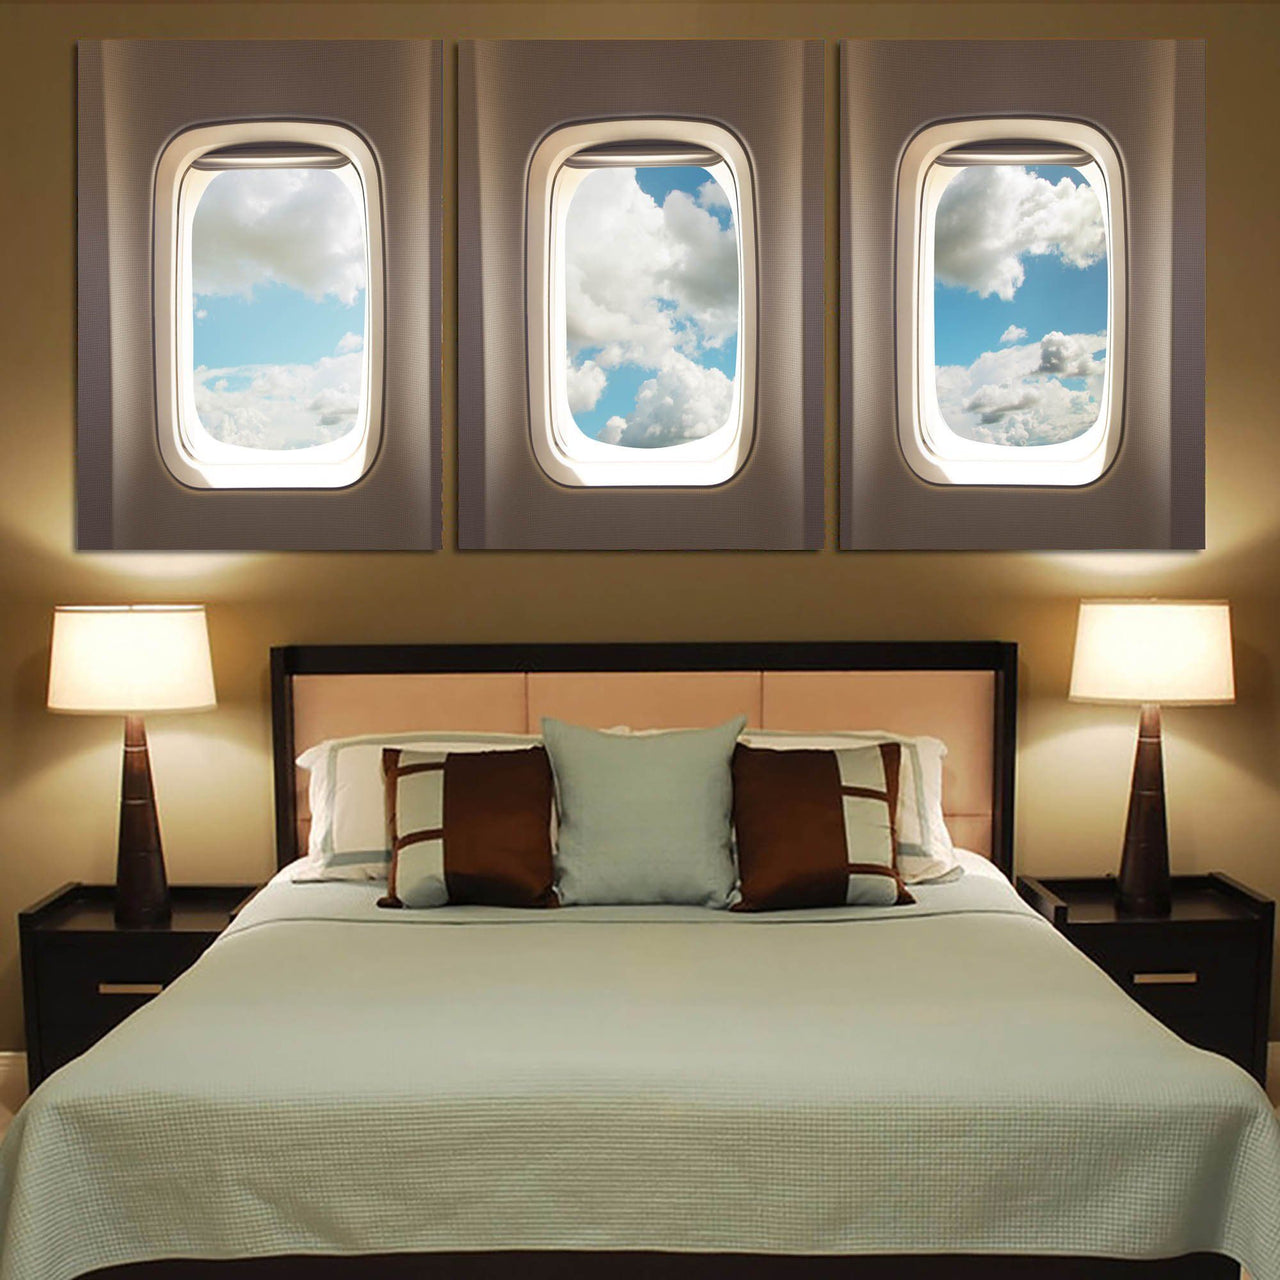 Airplane Windows & Clouds Printed Canvas Posters (3 Pieces) Aviation Shop 